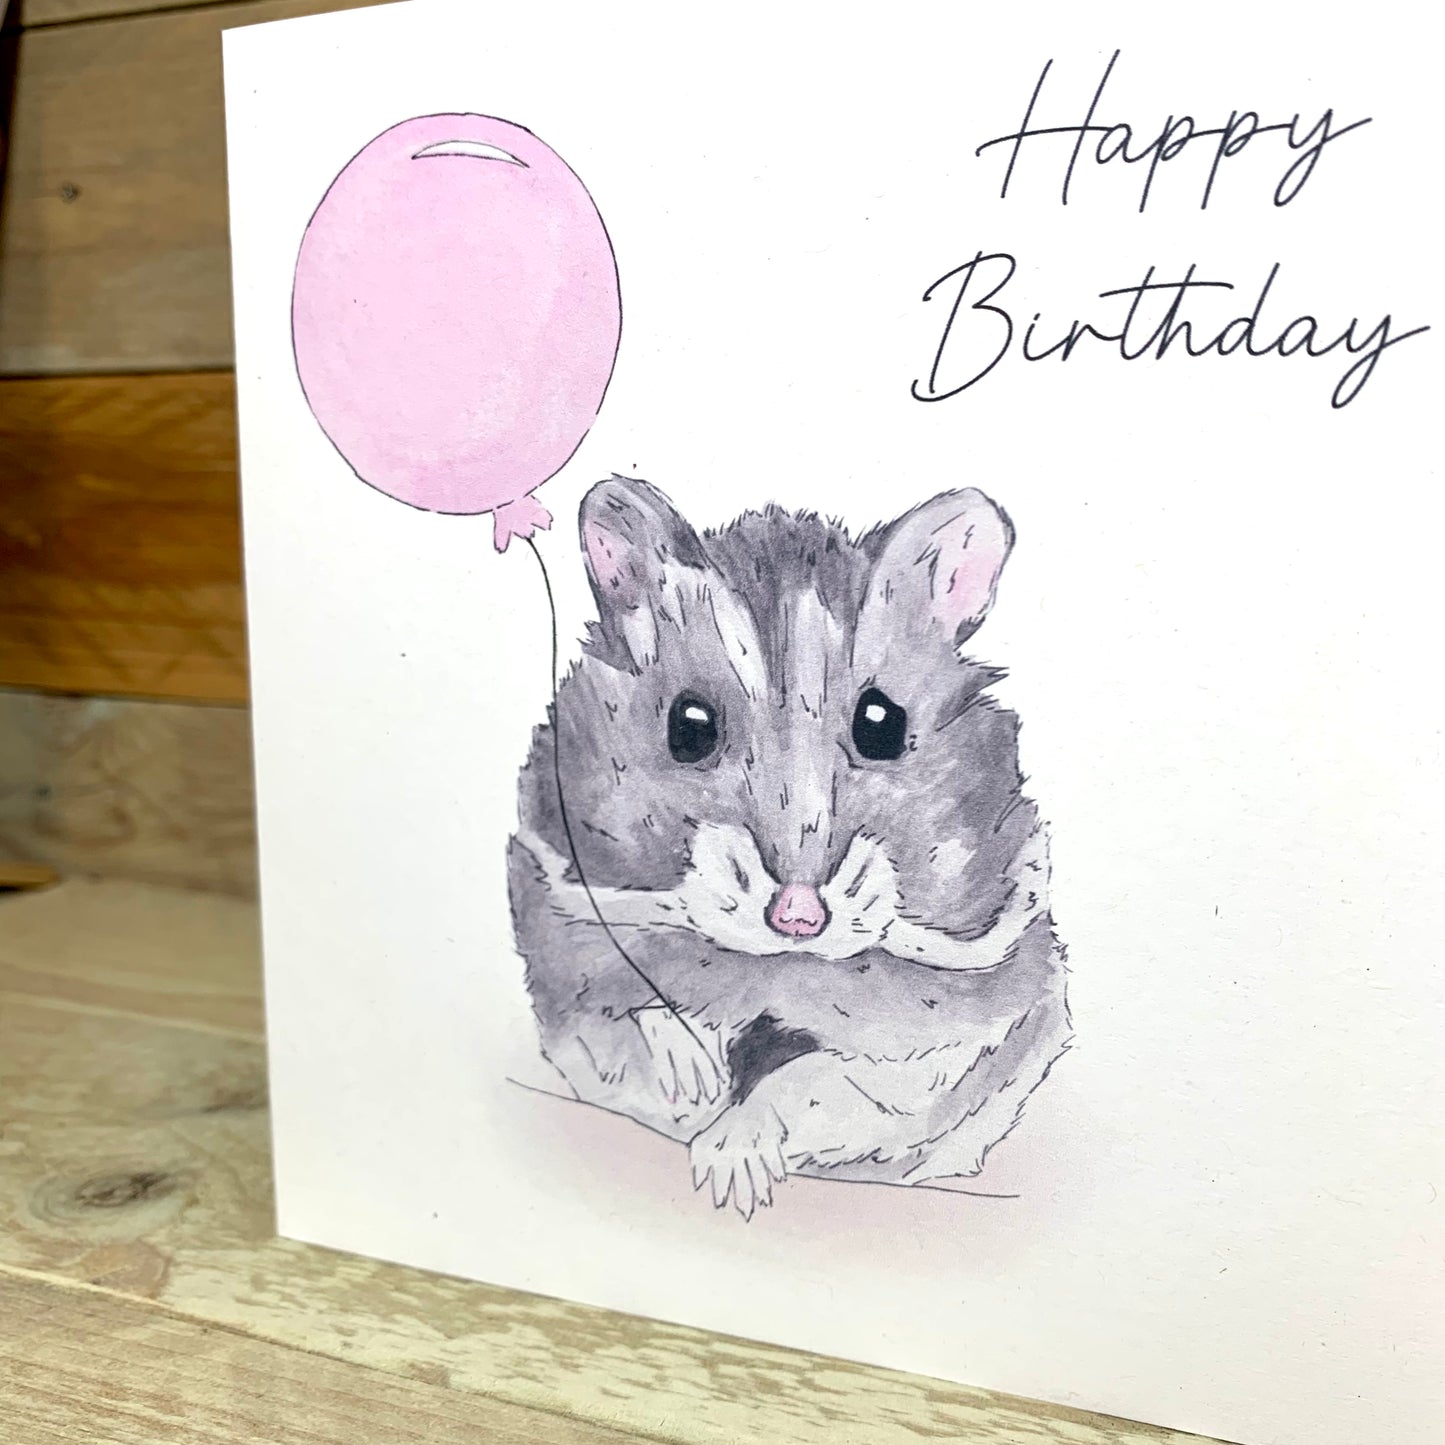 It's Gizmo The Hamster Birthday Card